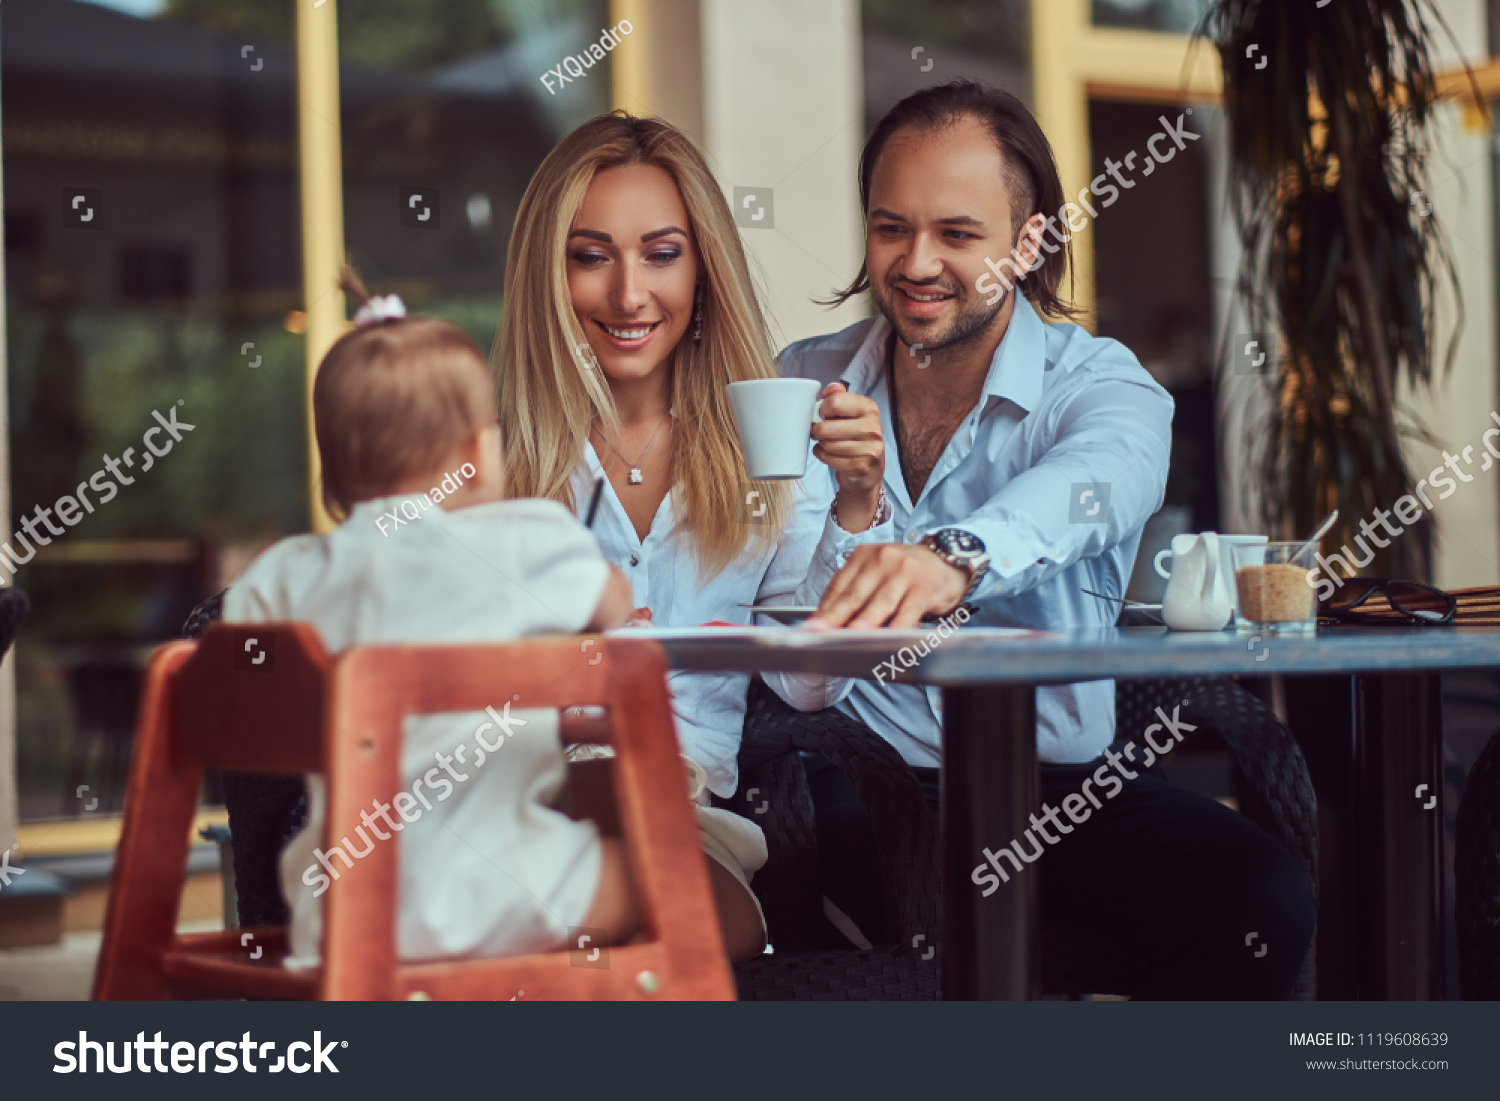 Family and people concept - happy mother, father and the little girl in outdoor cafe. #1119608639